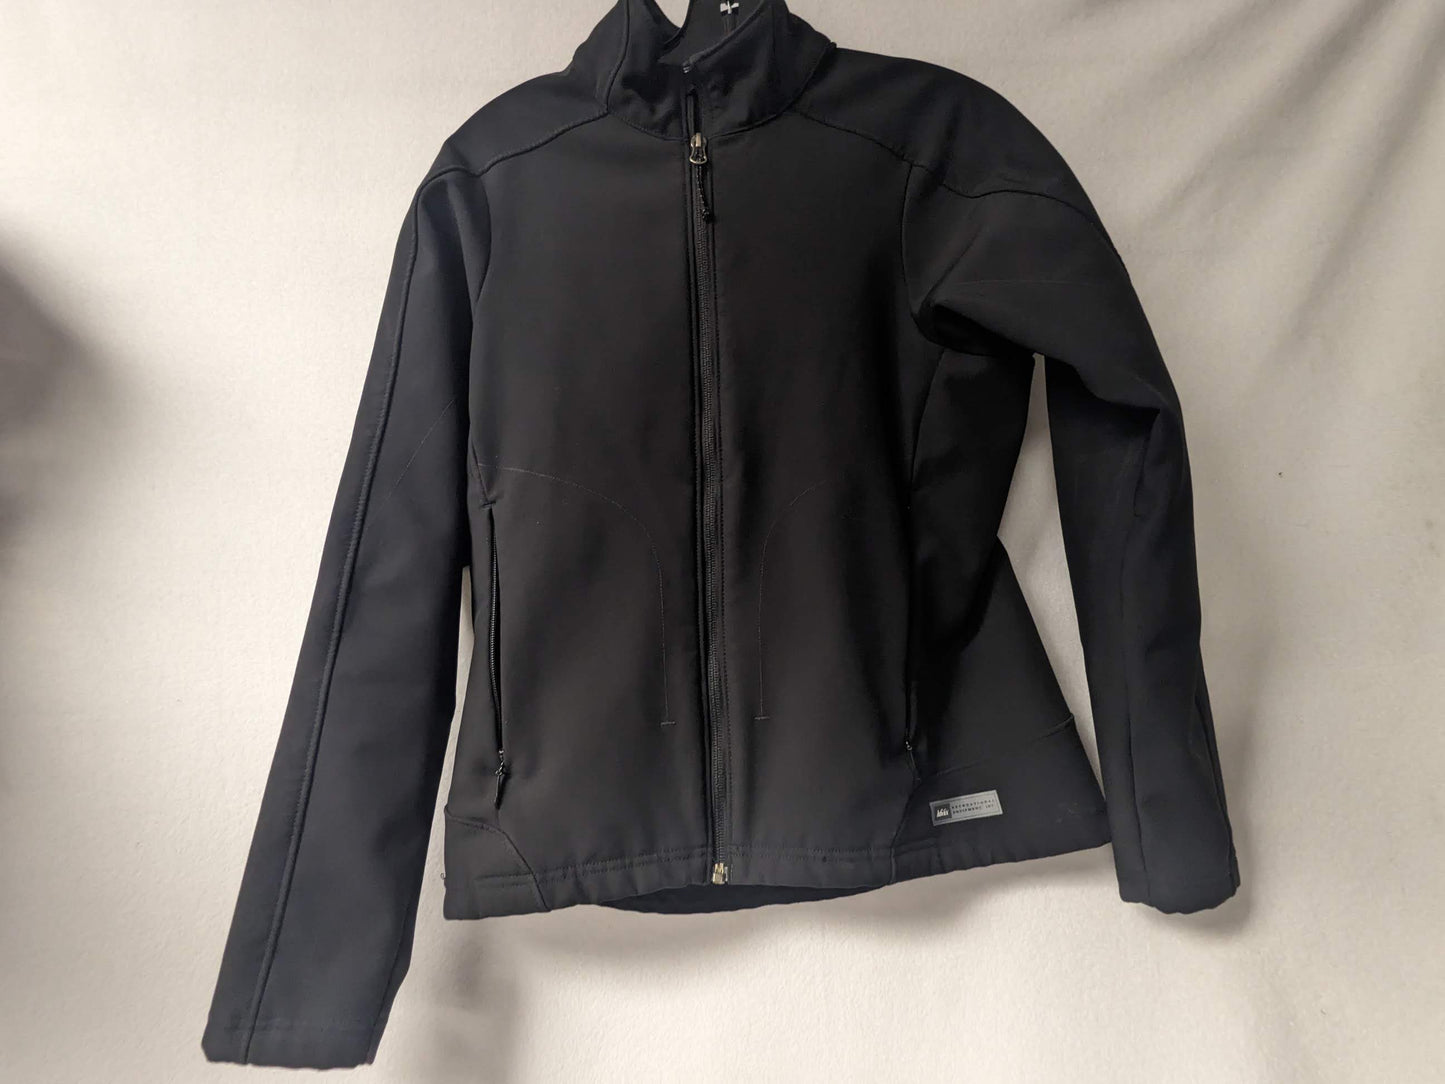 REI Full Zip Light Jacket Coat Size Small Color Black Condition Used